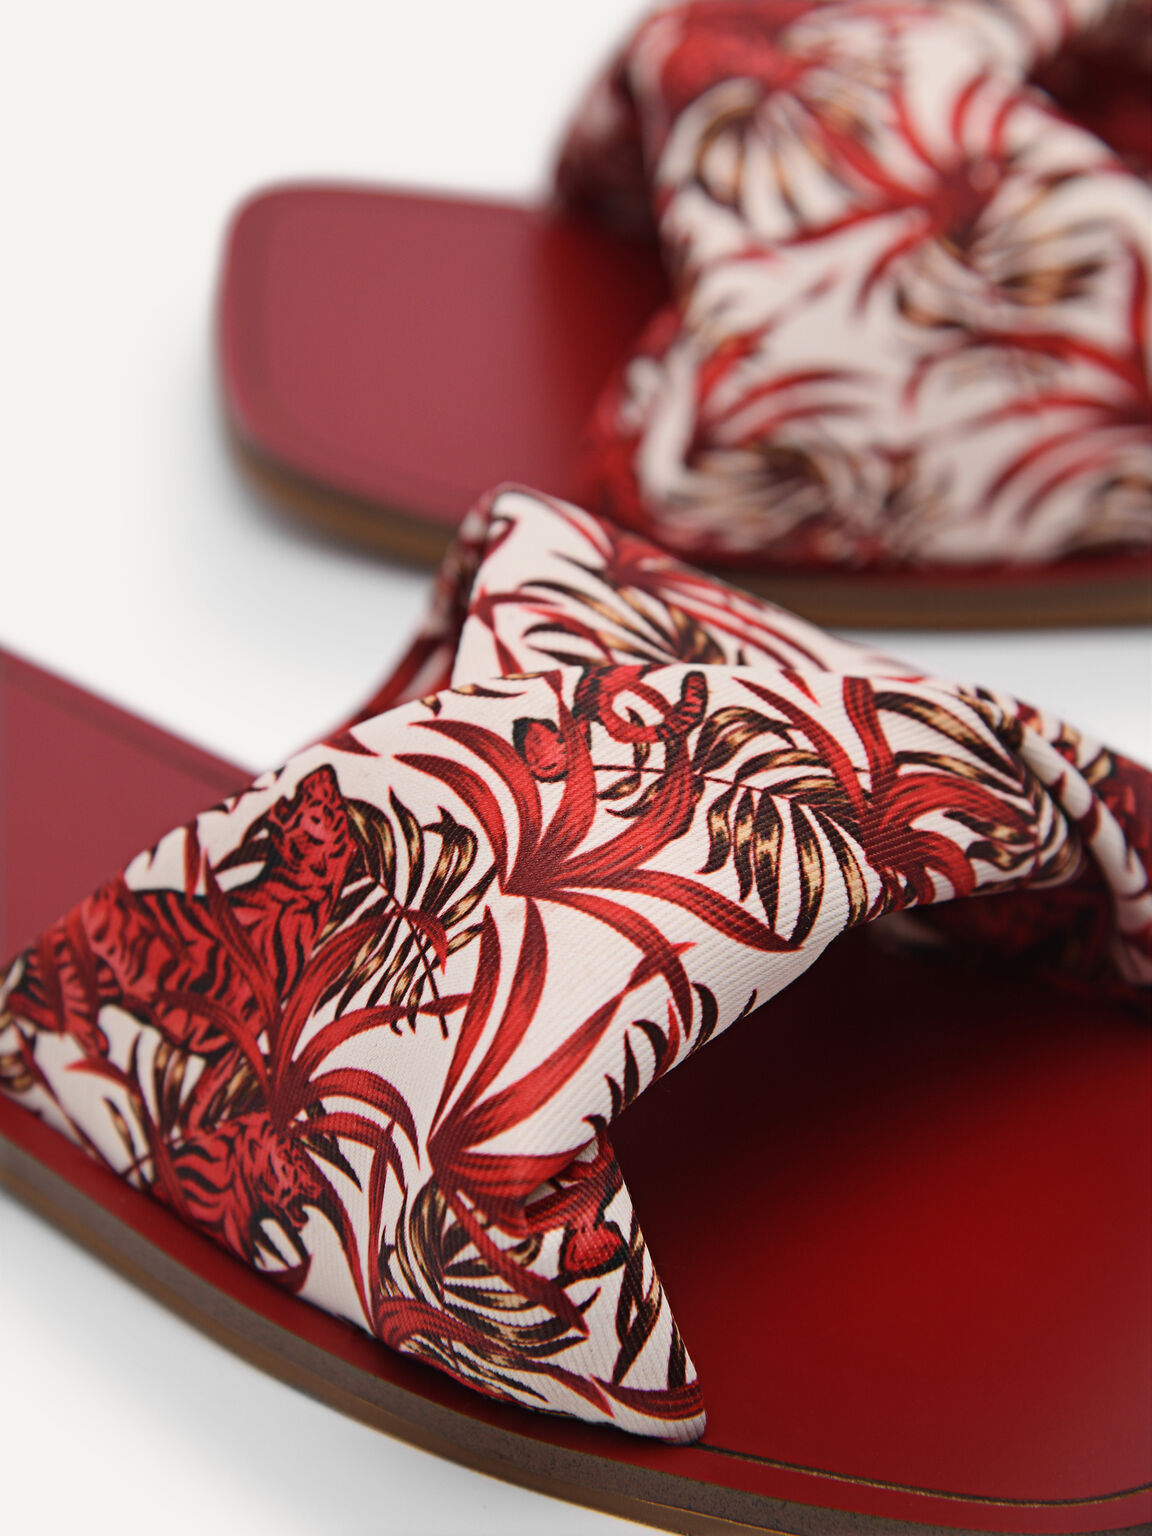 Printed Twisted Strap Sandals, Red, hi-res